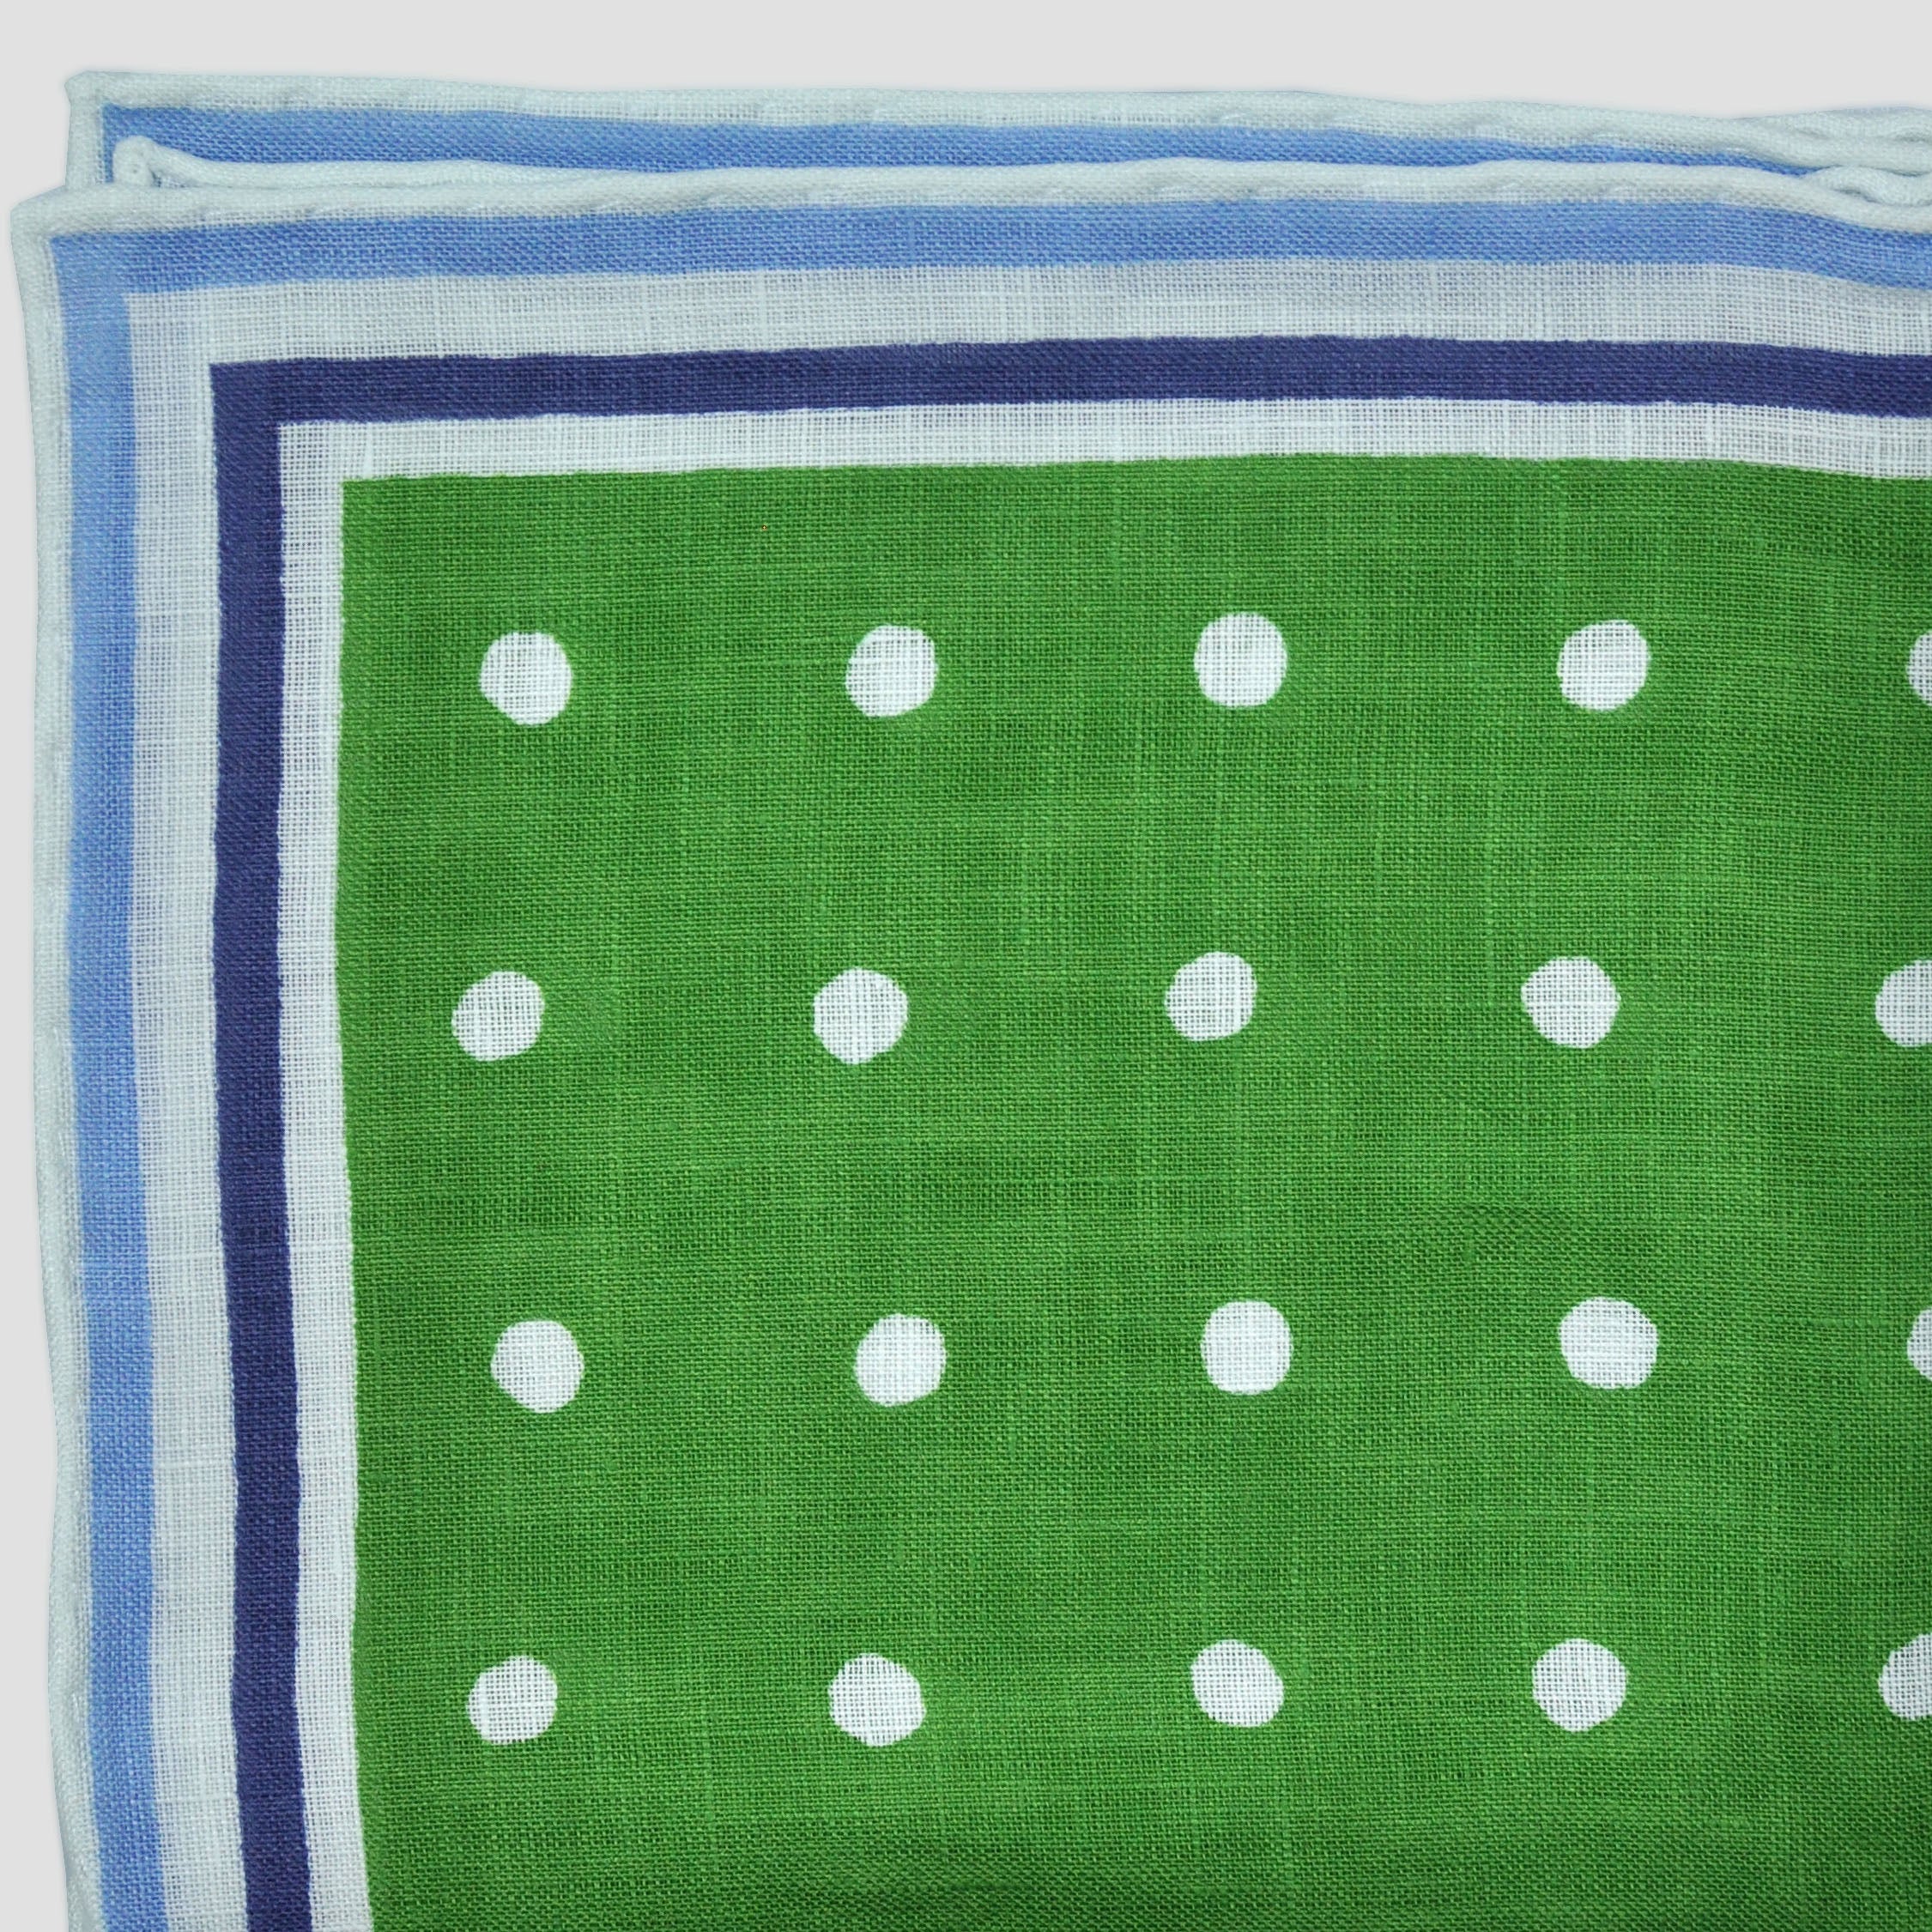 Dots with Striped Border Linen Pocket Square in Green, Navy & Blue